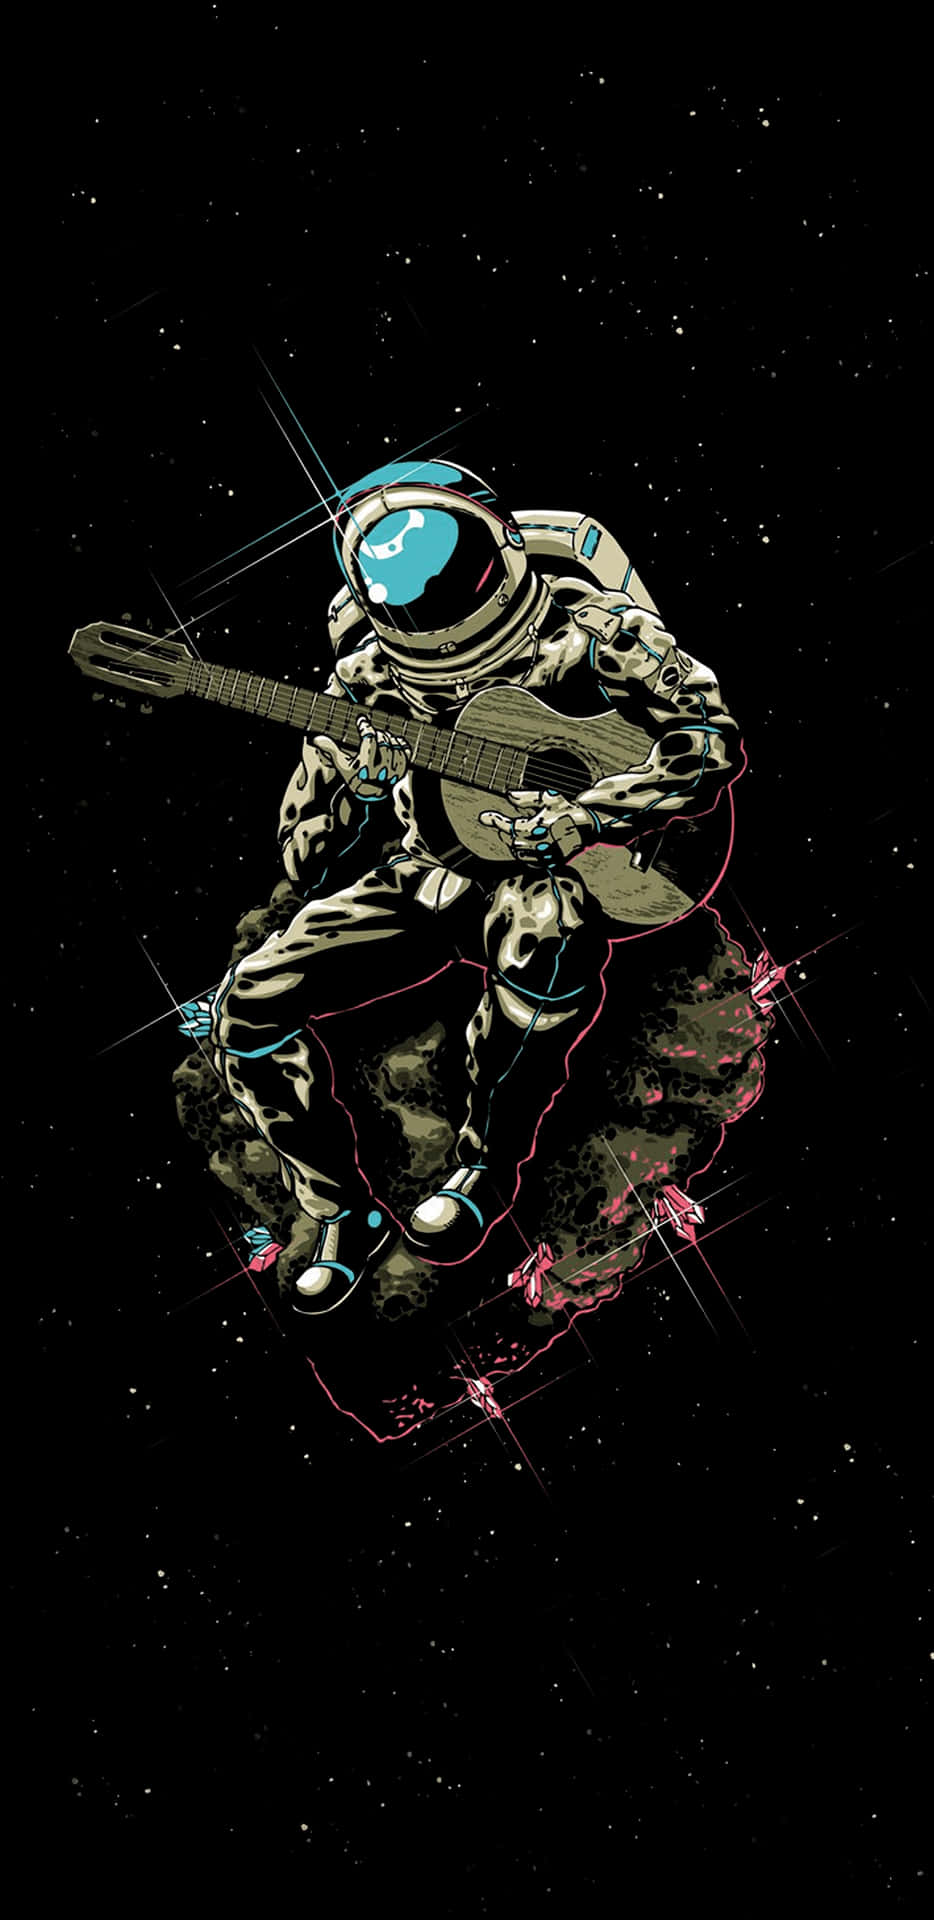 An Astronaut Is Sitting On A Rock With A Guitar